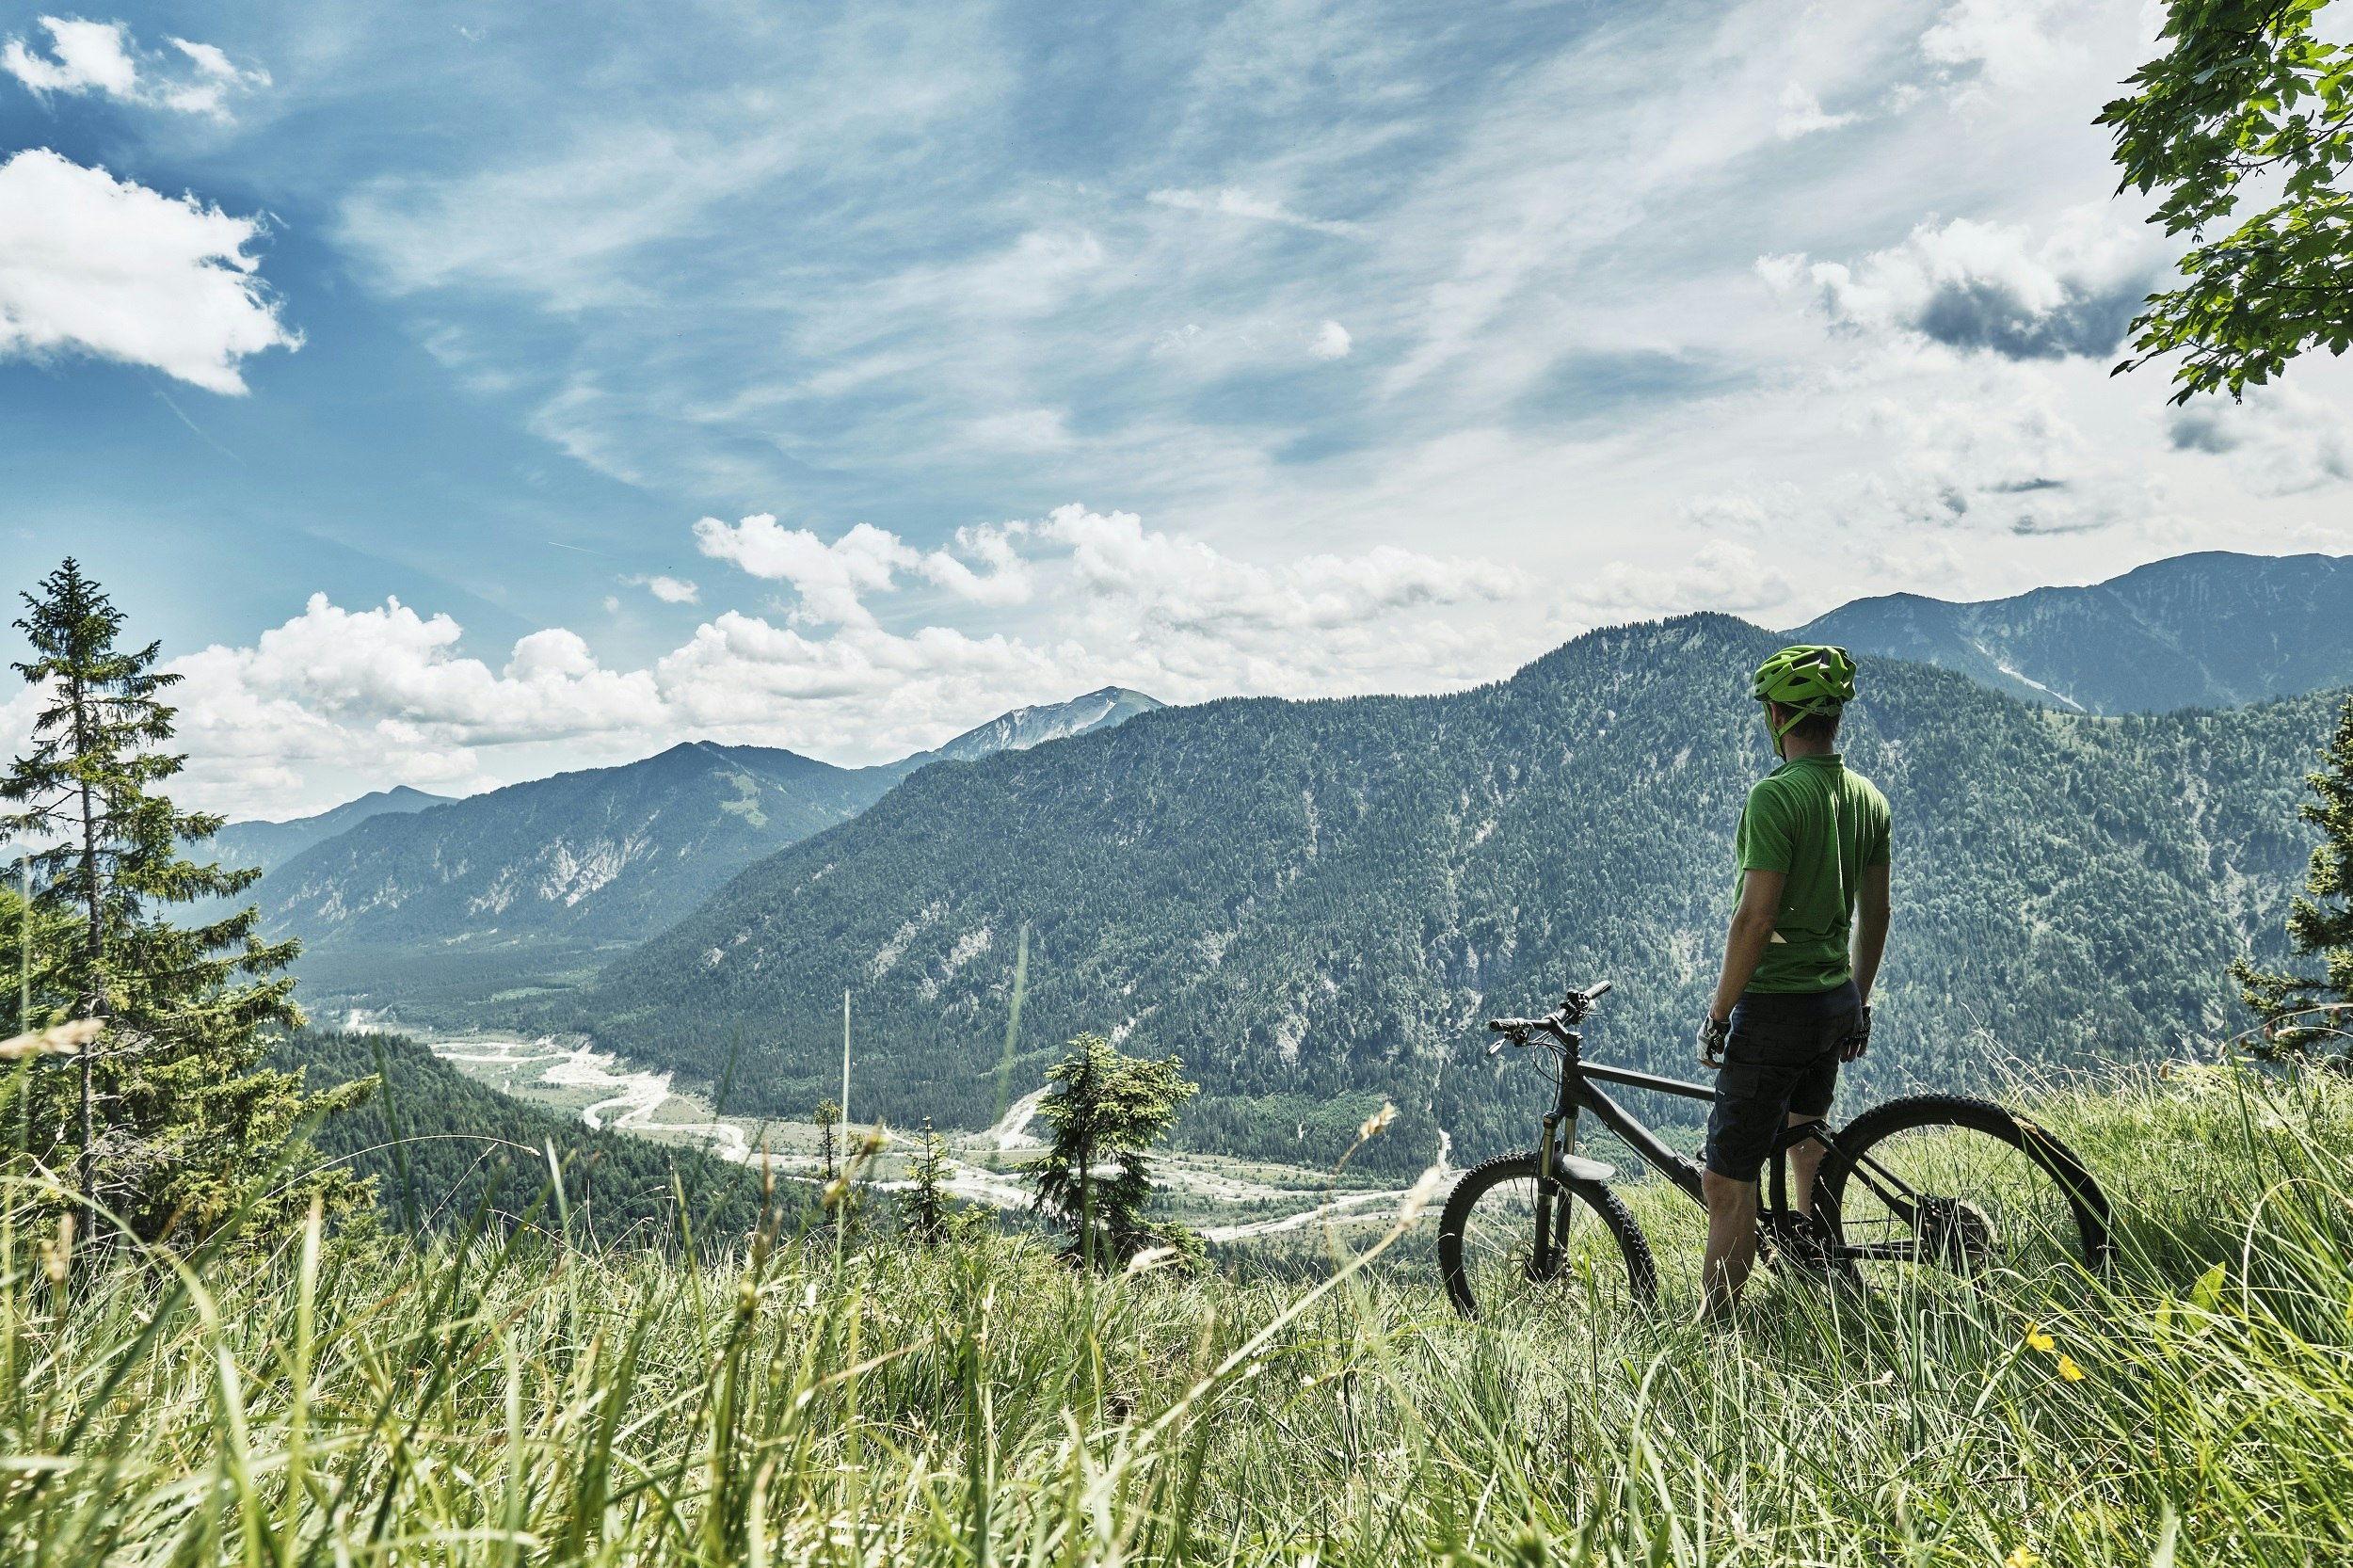 A mountain biker stands over his bike on a long grassy slope and looks down over the river flowing in the distant valley floor.